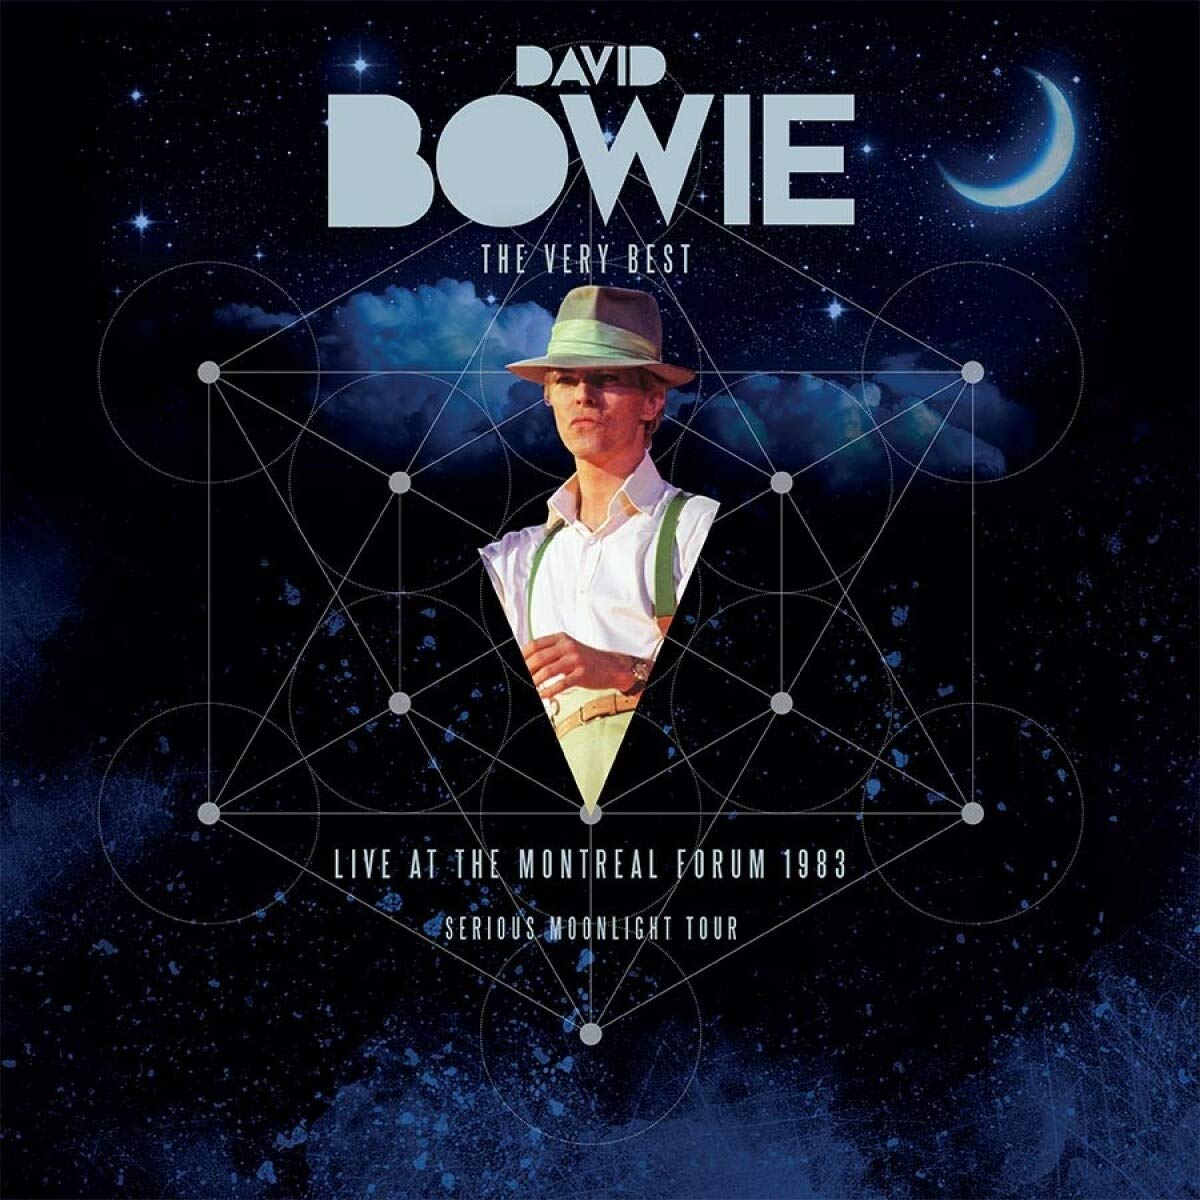 BOWIE DAVID - LIVE AT MONTREAL FORUM 1983 - SERIOUS MOONLIGHT TOUR